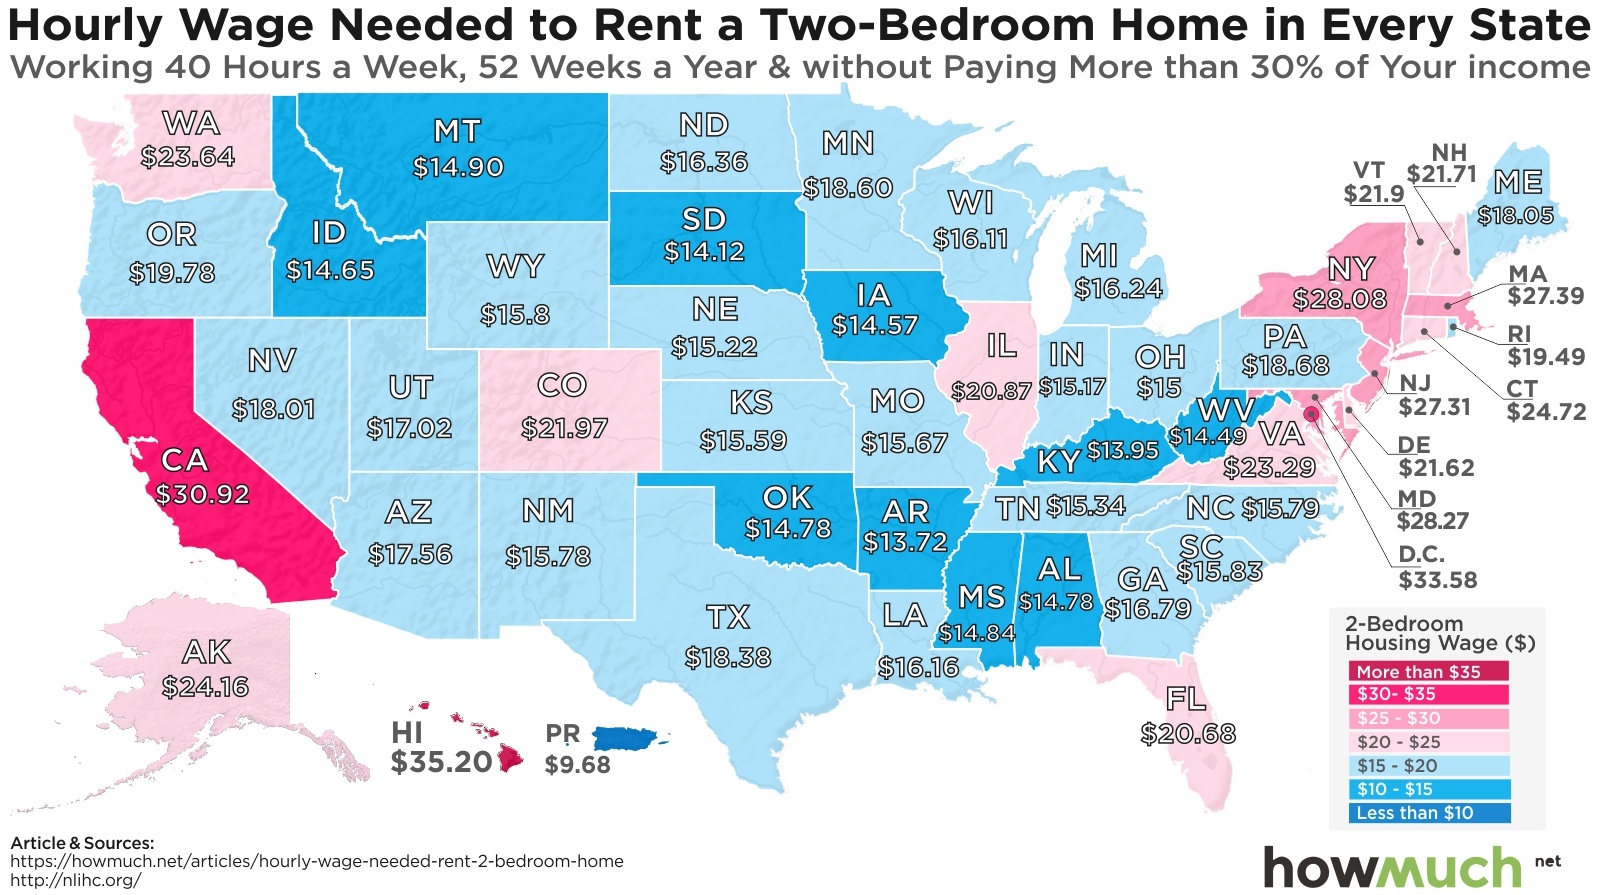 infographics and charts - hourly wage needed to afford a 2 bedroom apartment - Hourly Wage Needed to Rent a TwoBedroom Home in Every State Working 40 Hours a Week, 52 Weeks a Year & without Paying More than 30% of Your income Wa $23.64 Or $19.78 Article &